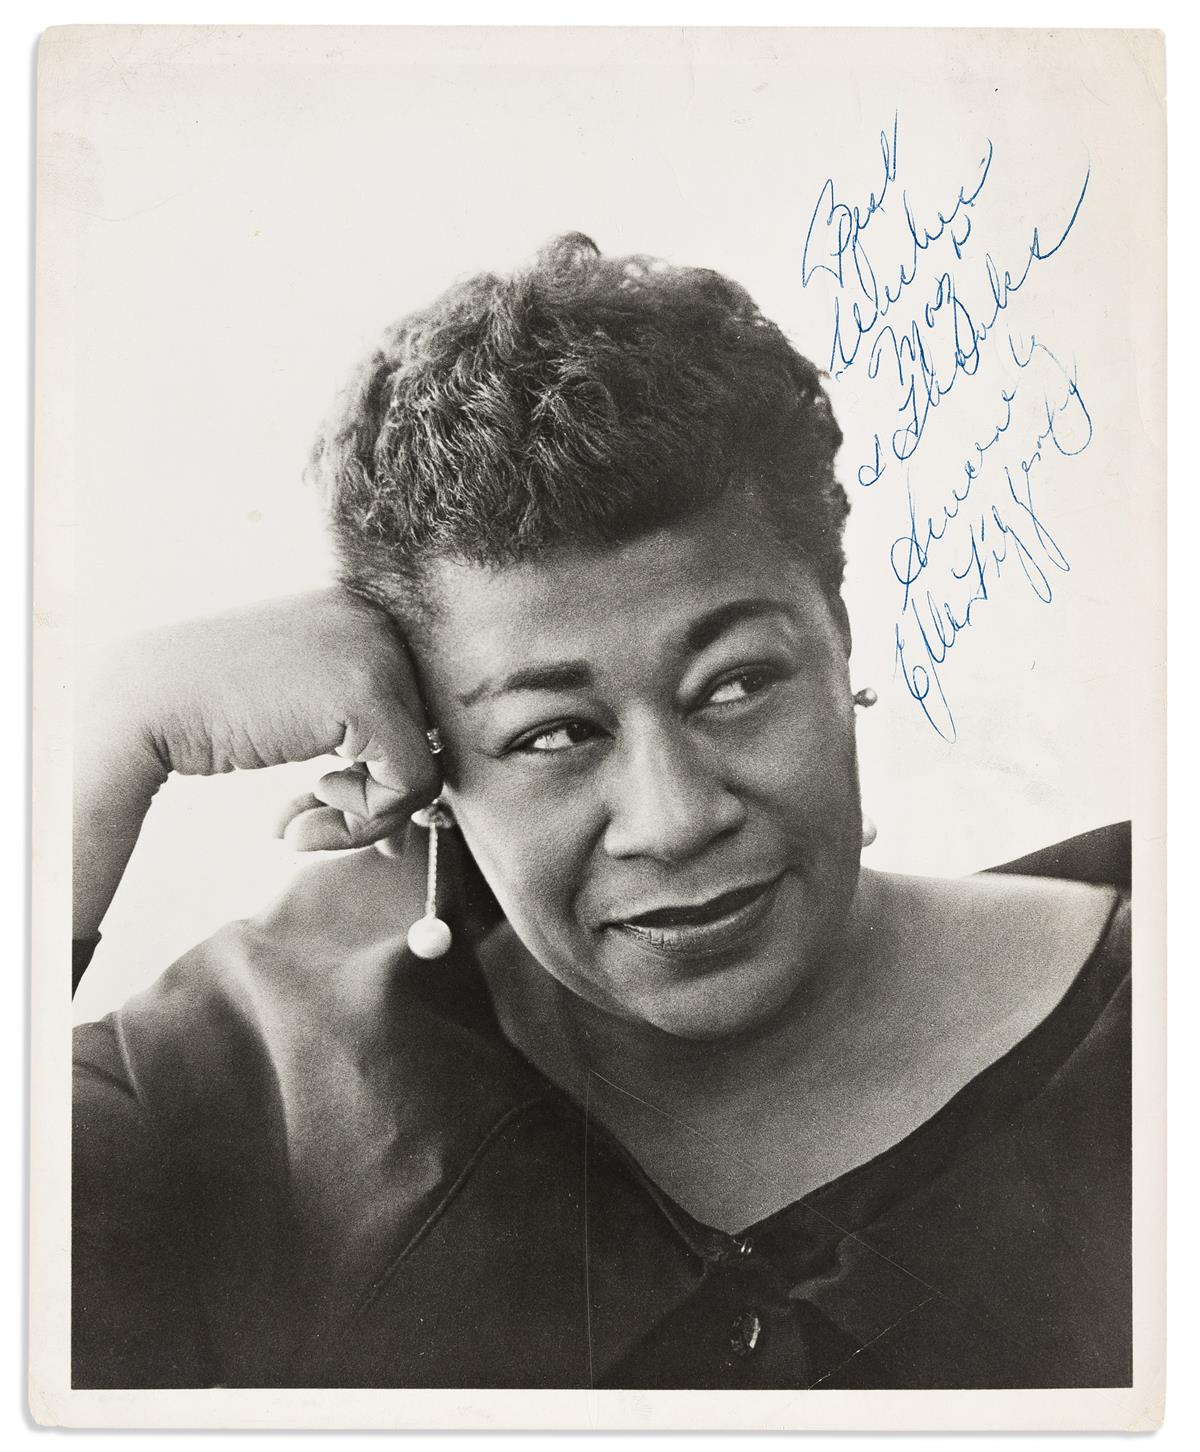 FITZGERALD, ELLA. Photograph Signed and Inscribed, Best / Wishes / Maza / & Thanks / Sincerely / Ella Fitzgerald,